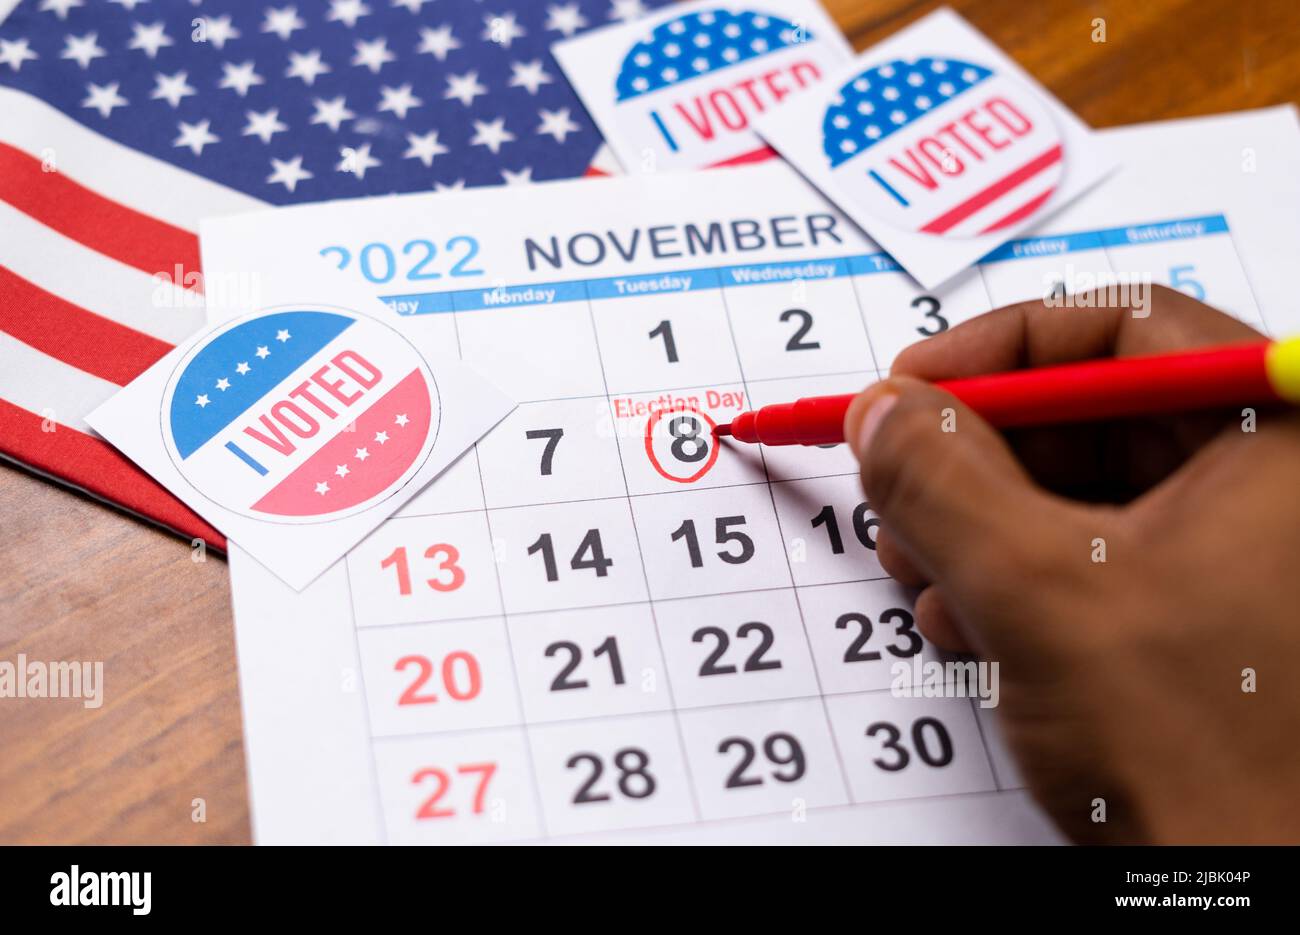 close up shot of hands marking November 8 as reminder for polling in 2022 US or american mediterm election. Stock Photo